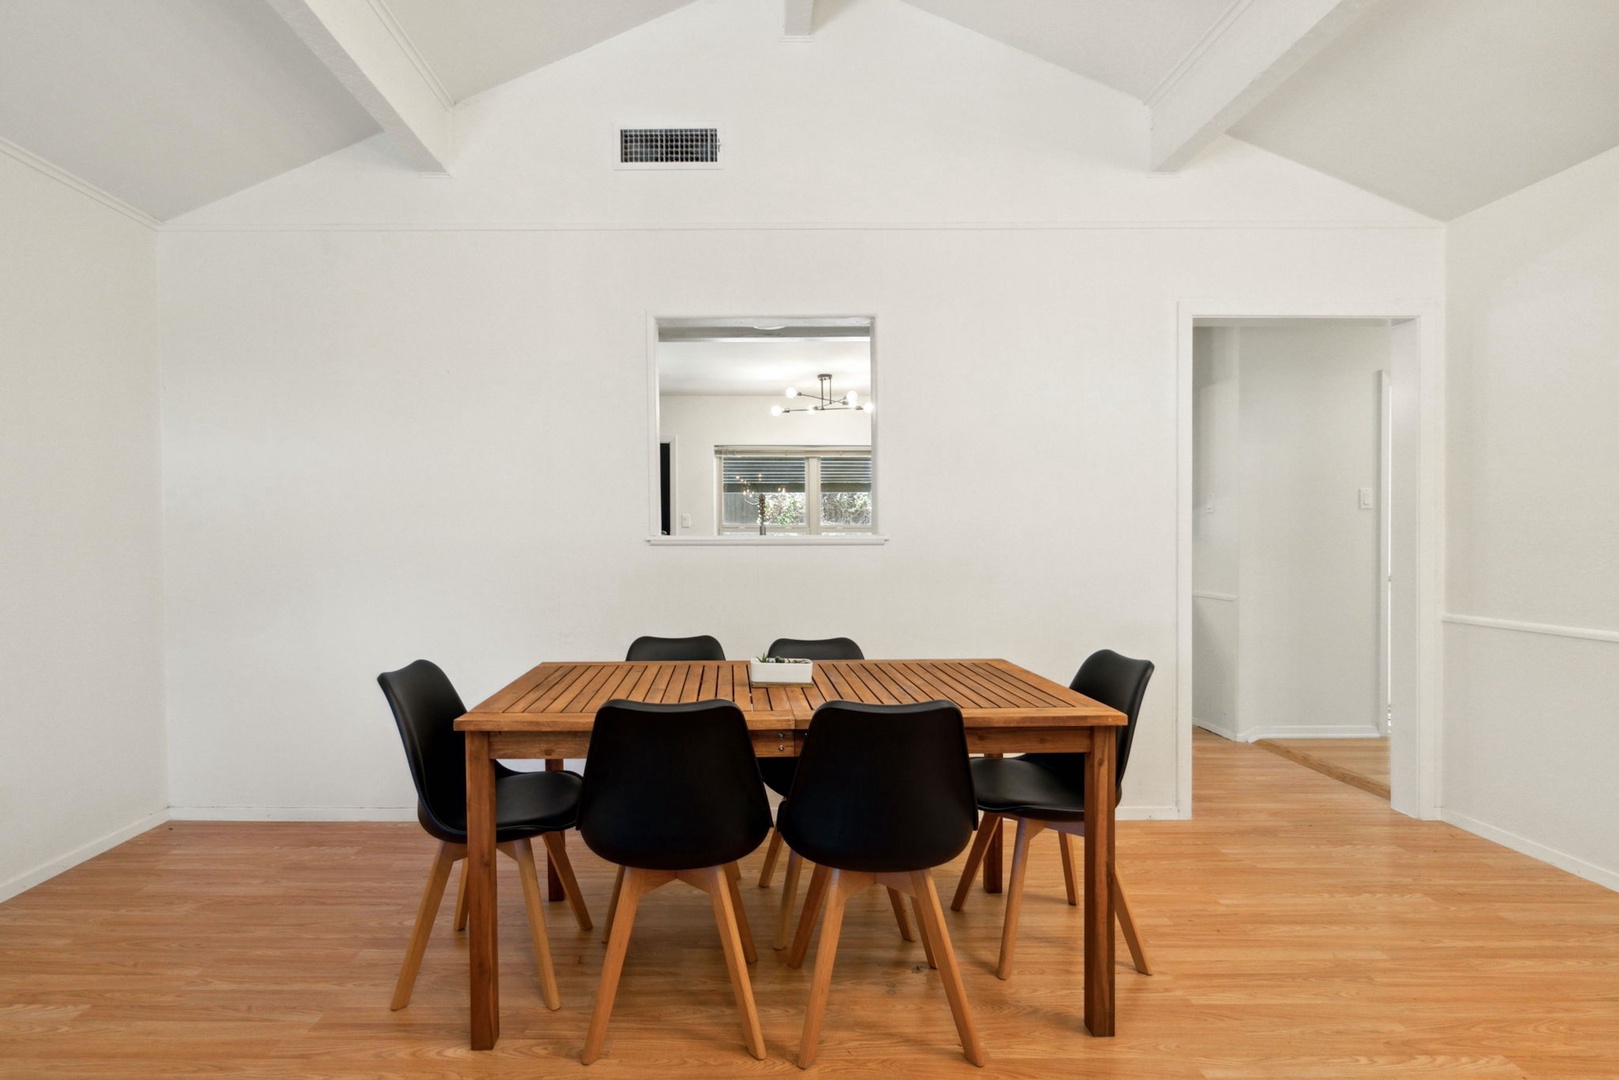 Dining table with seating for 6